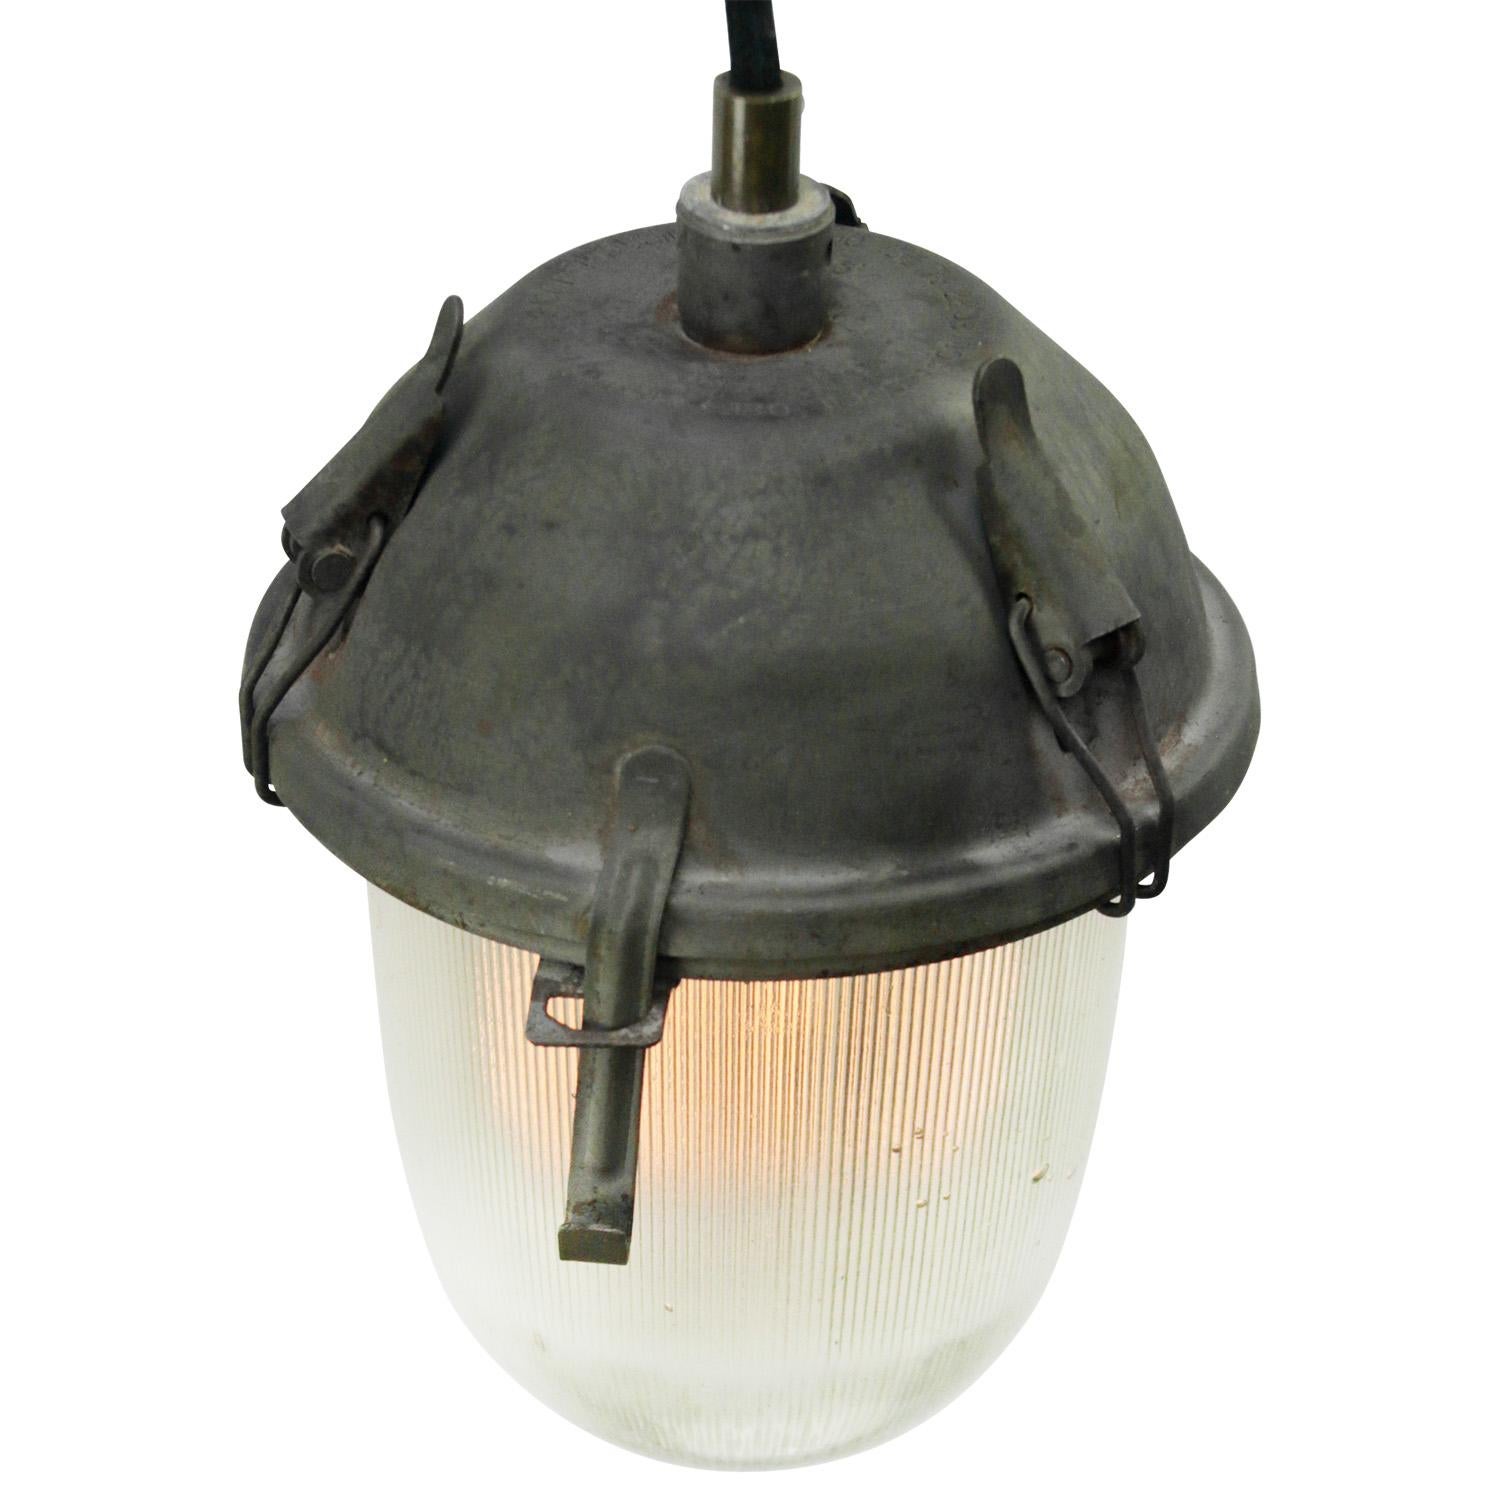 Small Industrial pendant light
Clear striped glass

Weight: 2.00 kg / 4.4 lb

Priced per individual item. All lamps have been made suitable by international standards for incandescent light bulbs, energy-efficient and LED bulbs. E26/E27 bulb